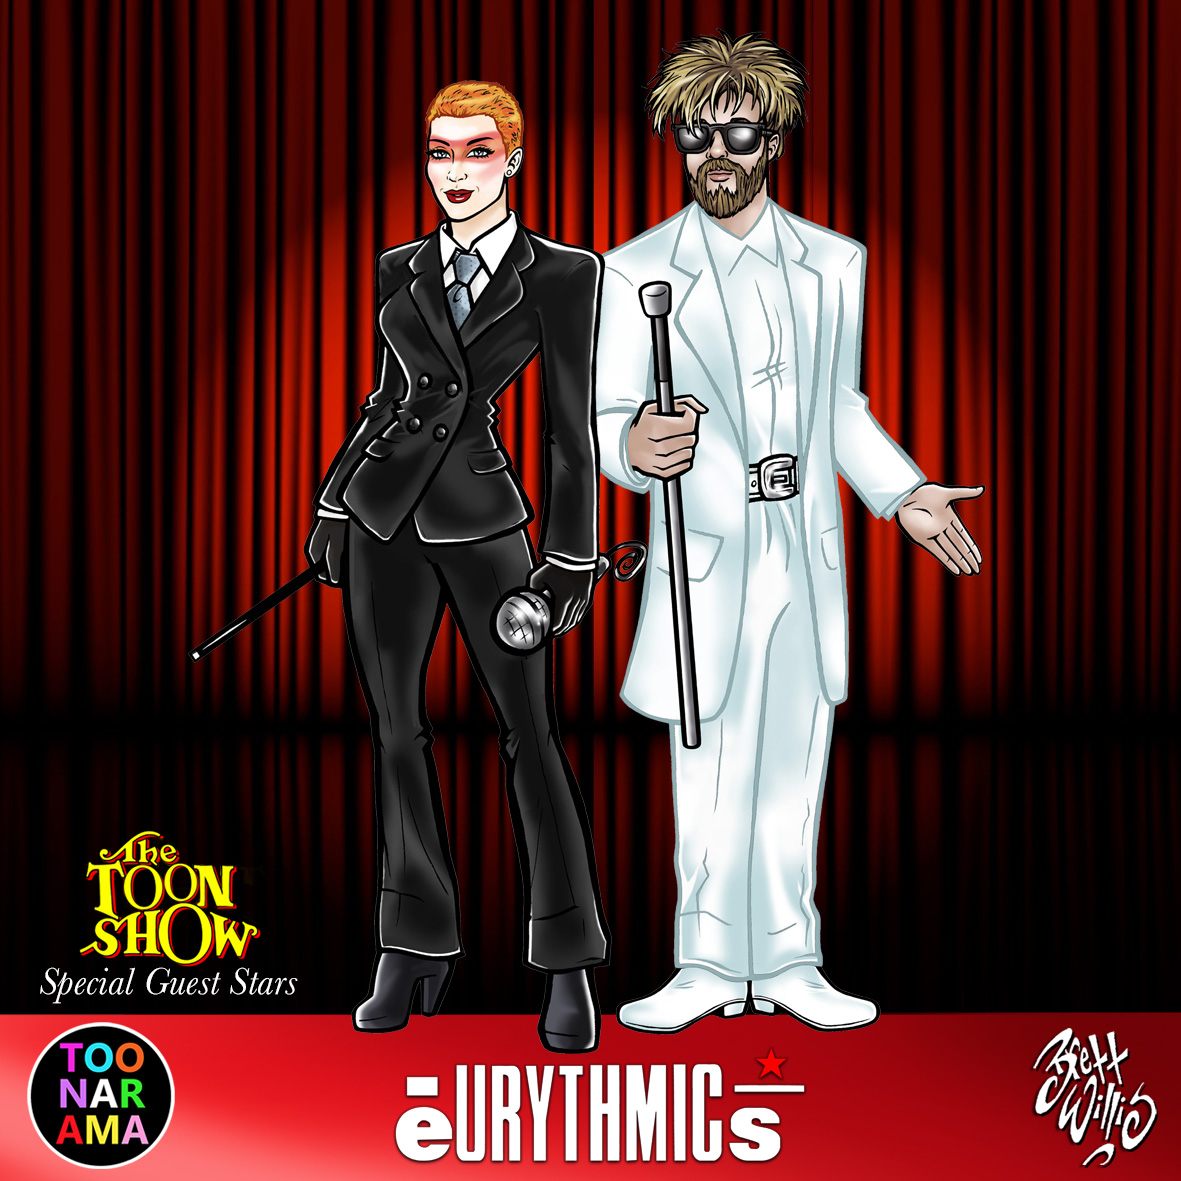 On This Day: 29/04/1985 - Celebrating the release of the EURYTHMICS 5th studio album BE YOURSELF TONIGHT! #mighty #music #eurythmics #toonarama